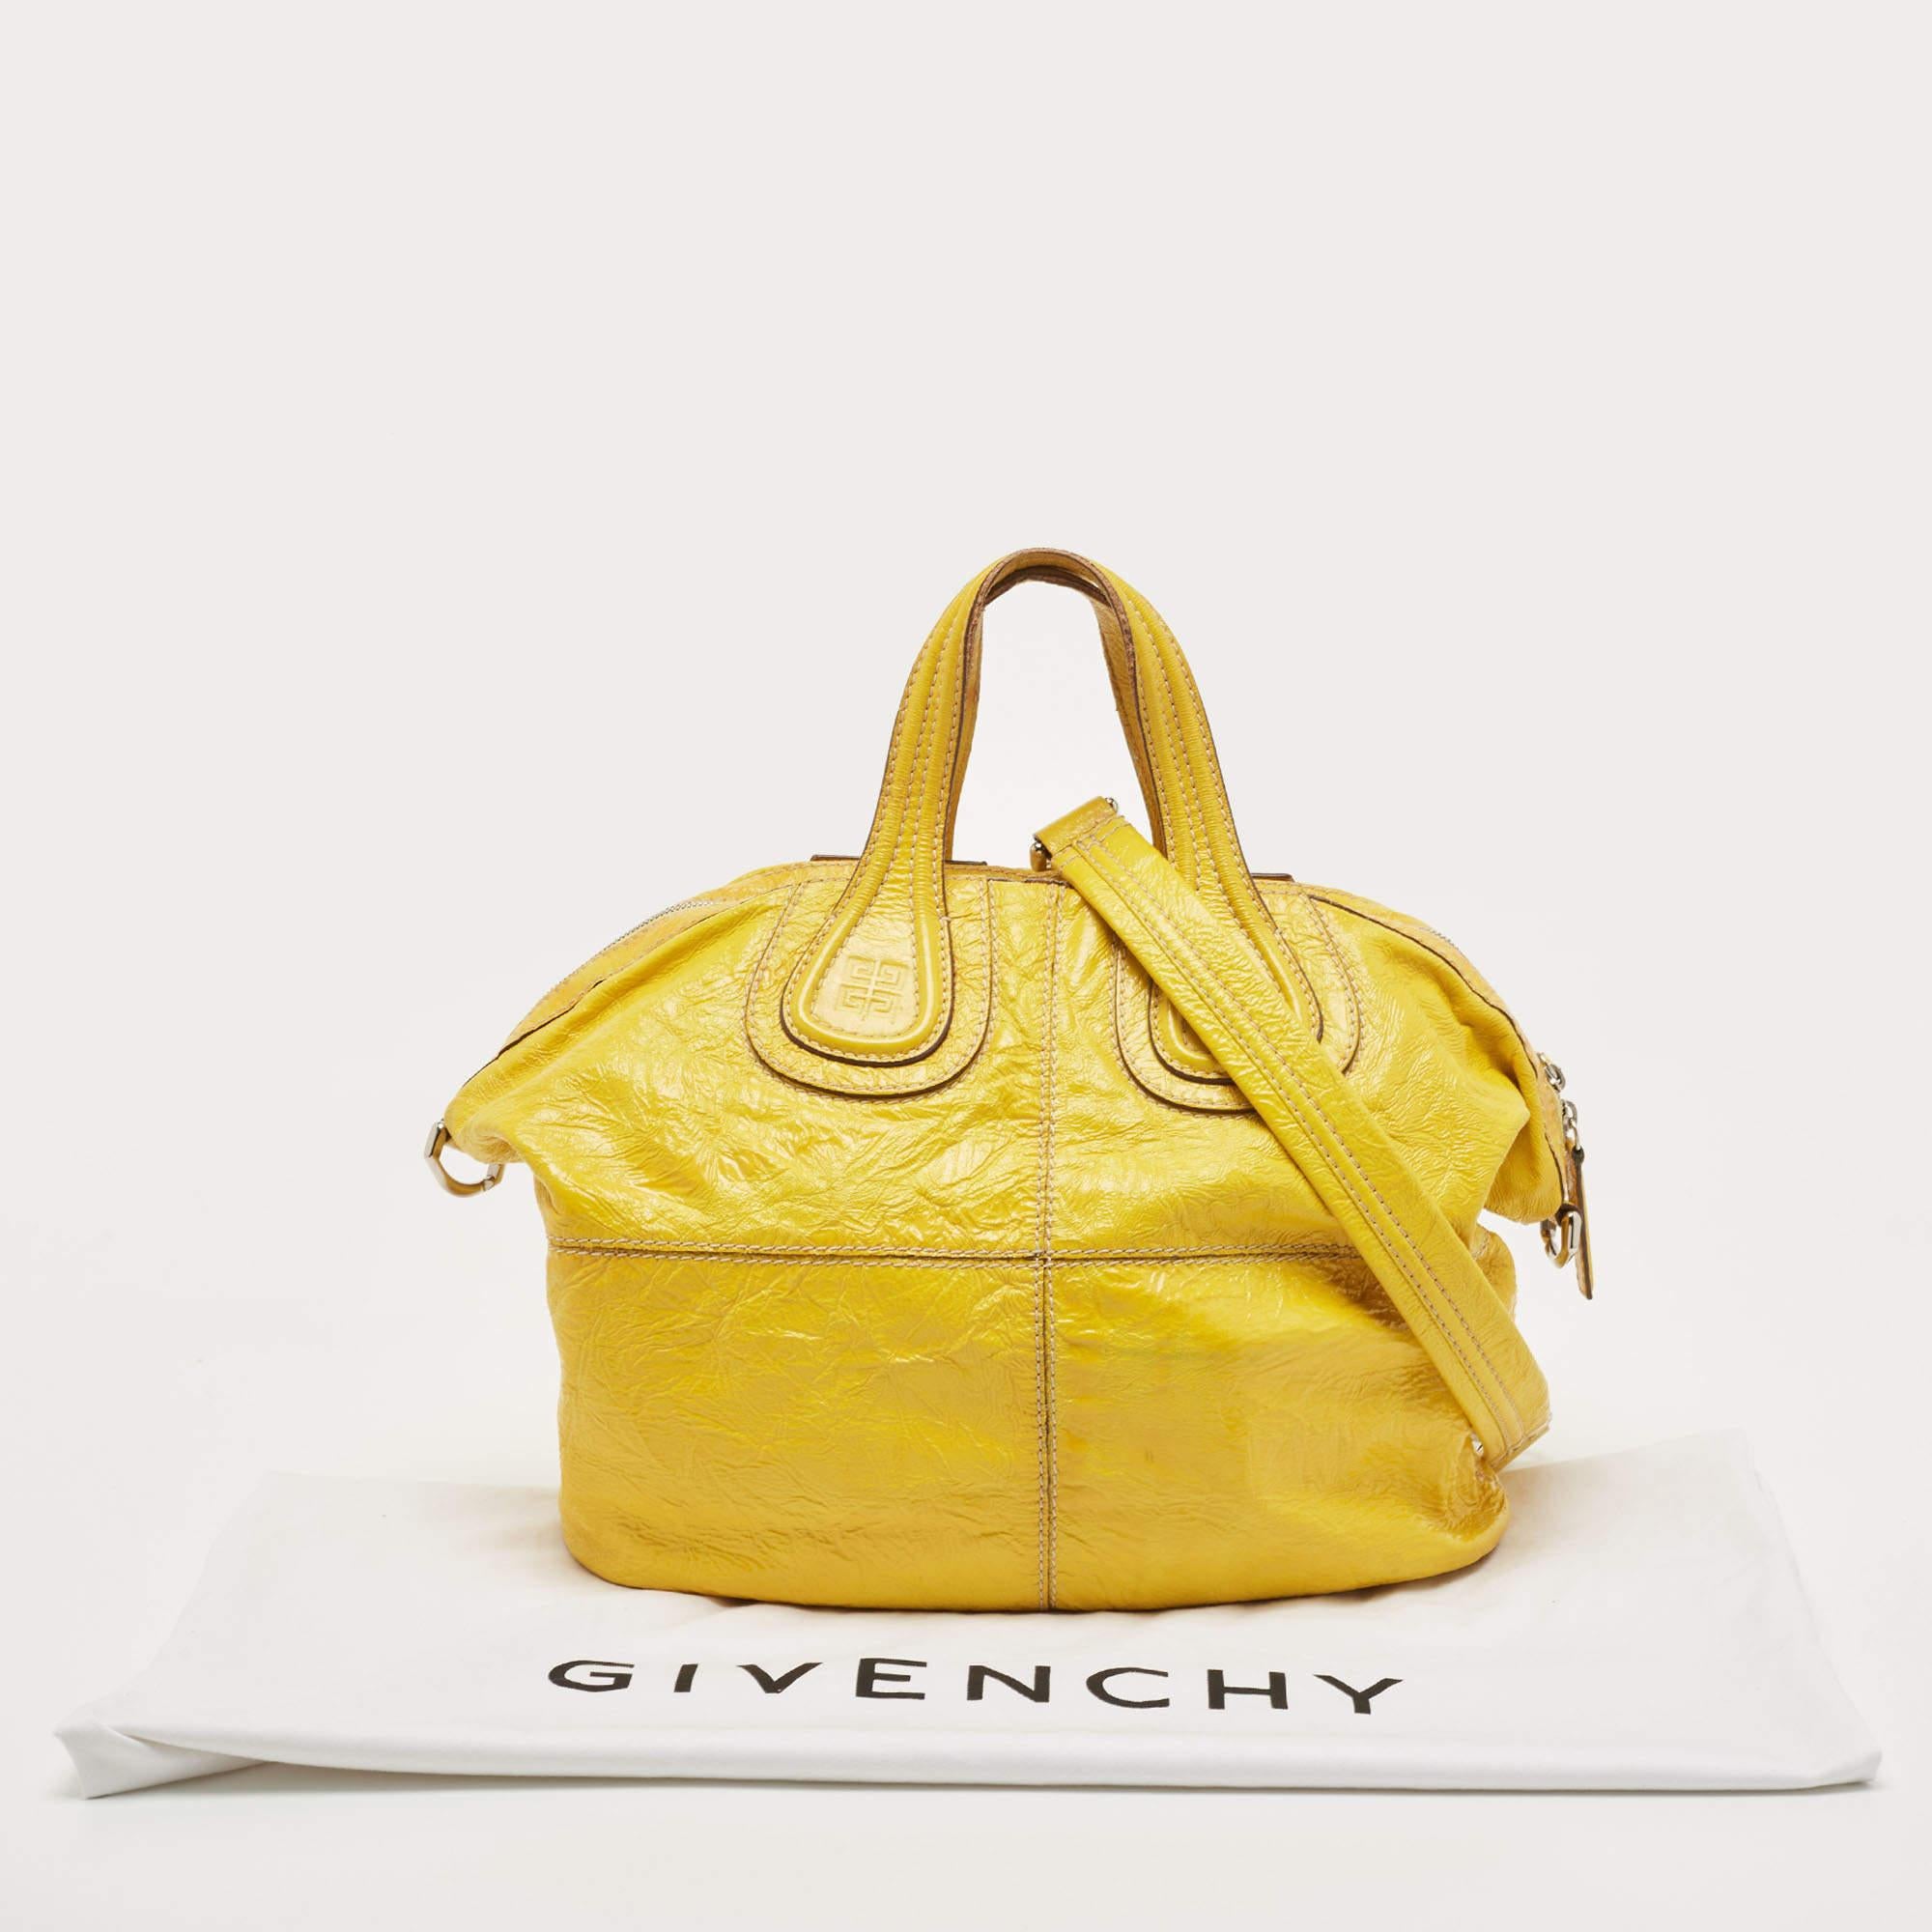 Givenchy Yellow Patent Leather Nightingale Satchel 2